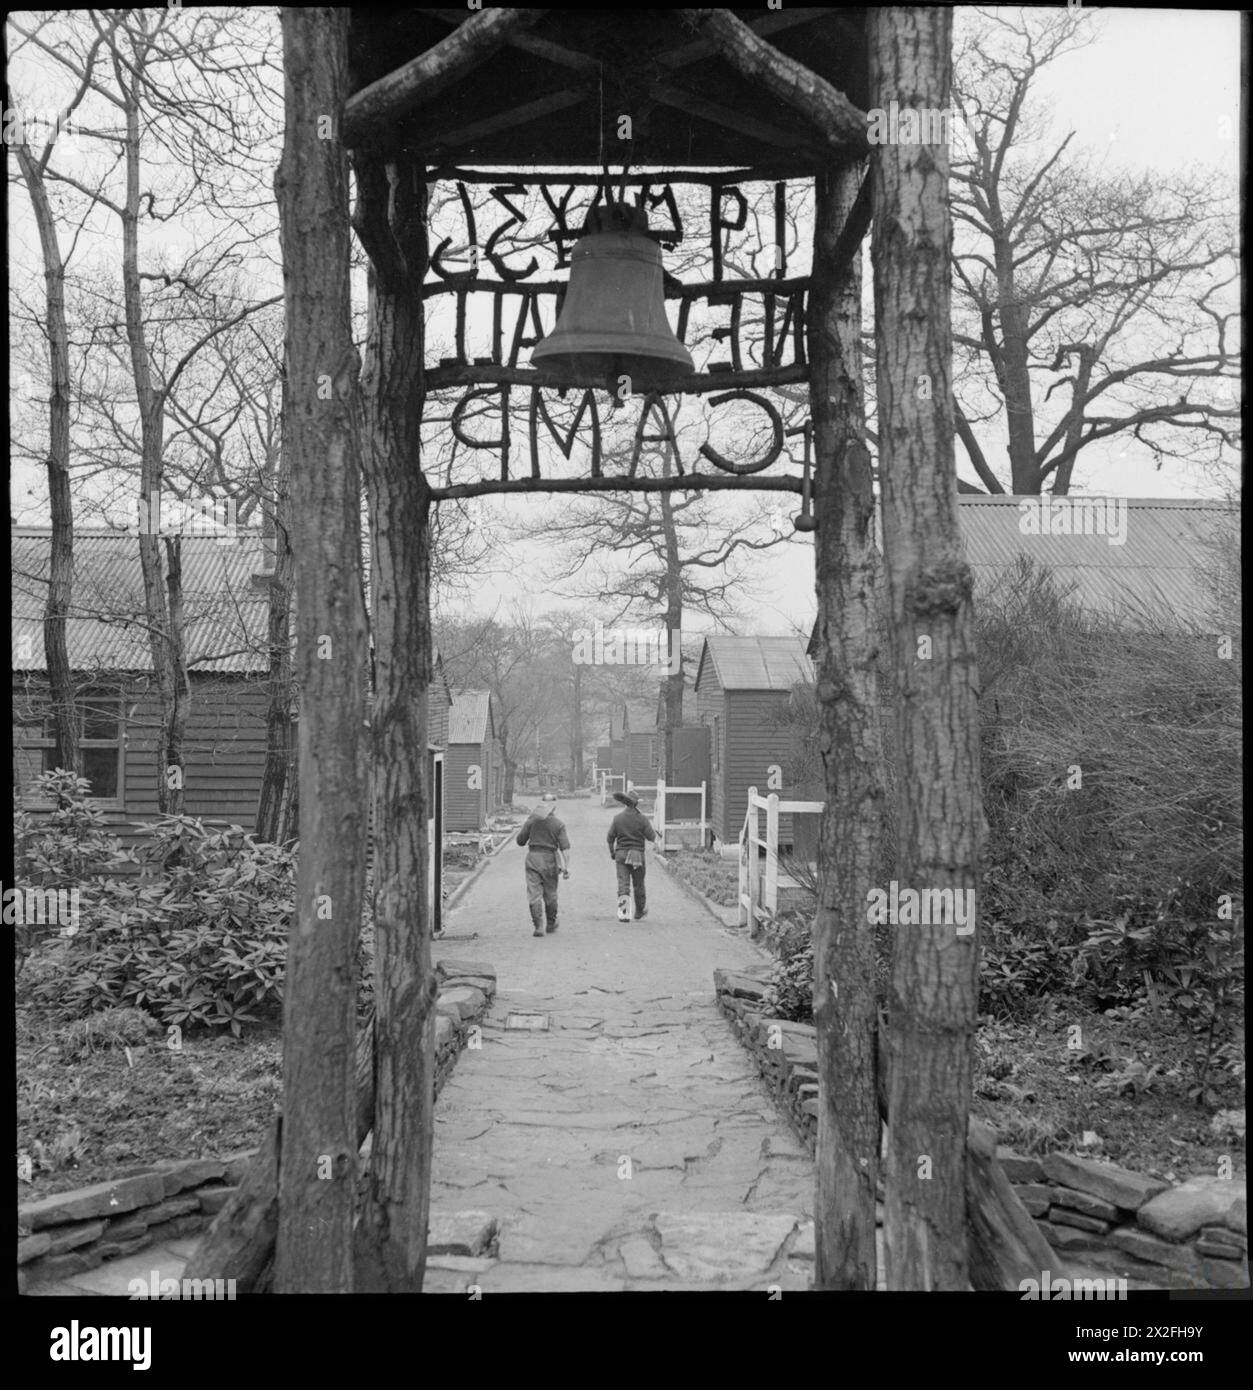 WAKEFIELD TRAINING PRISON AND CAMP: EVERYDAY LIFE IN A BRITISH PRISON, WAKEFIELD, YORKSHIRE, ENGLAND, 1944 - The entrance to New Hall Camp at Wakefield Training Prison. Two inmates walk down the path towards their huts, carrying garden tools. According to the original caption, the land for this camp was acquired in 1933. "Parties of prisoners conveyed daily from Wakefield Prison cleared the woodland for cultivation and gradually erected the camp" Stock Photo